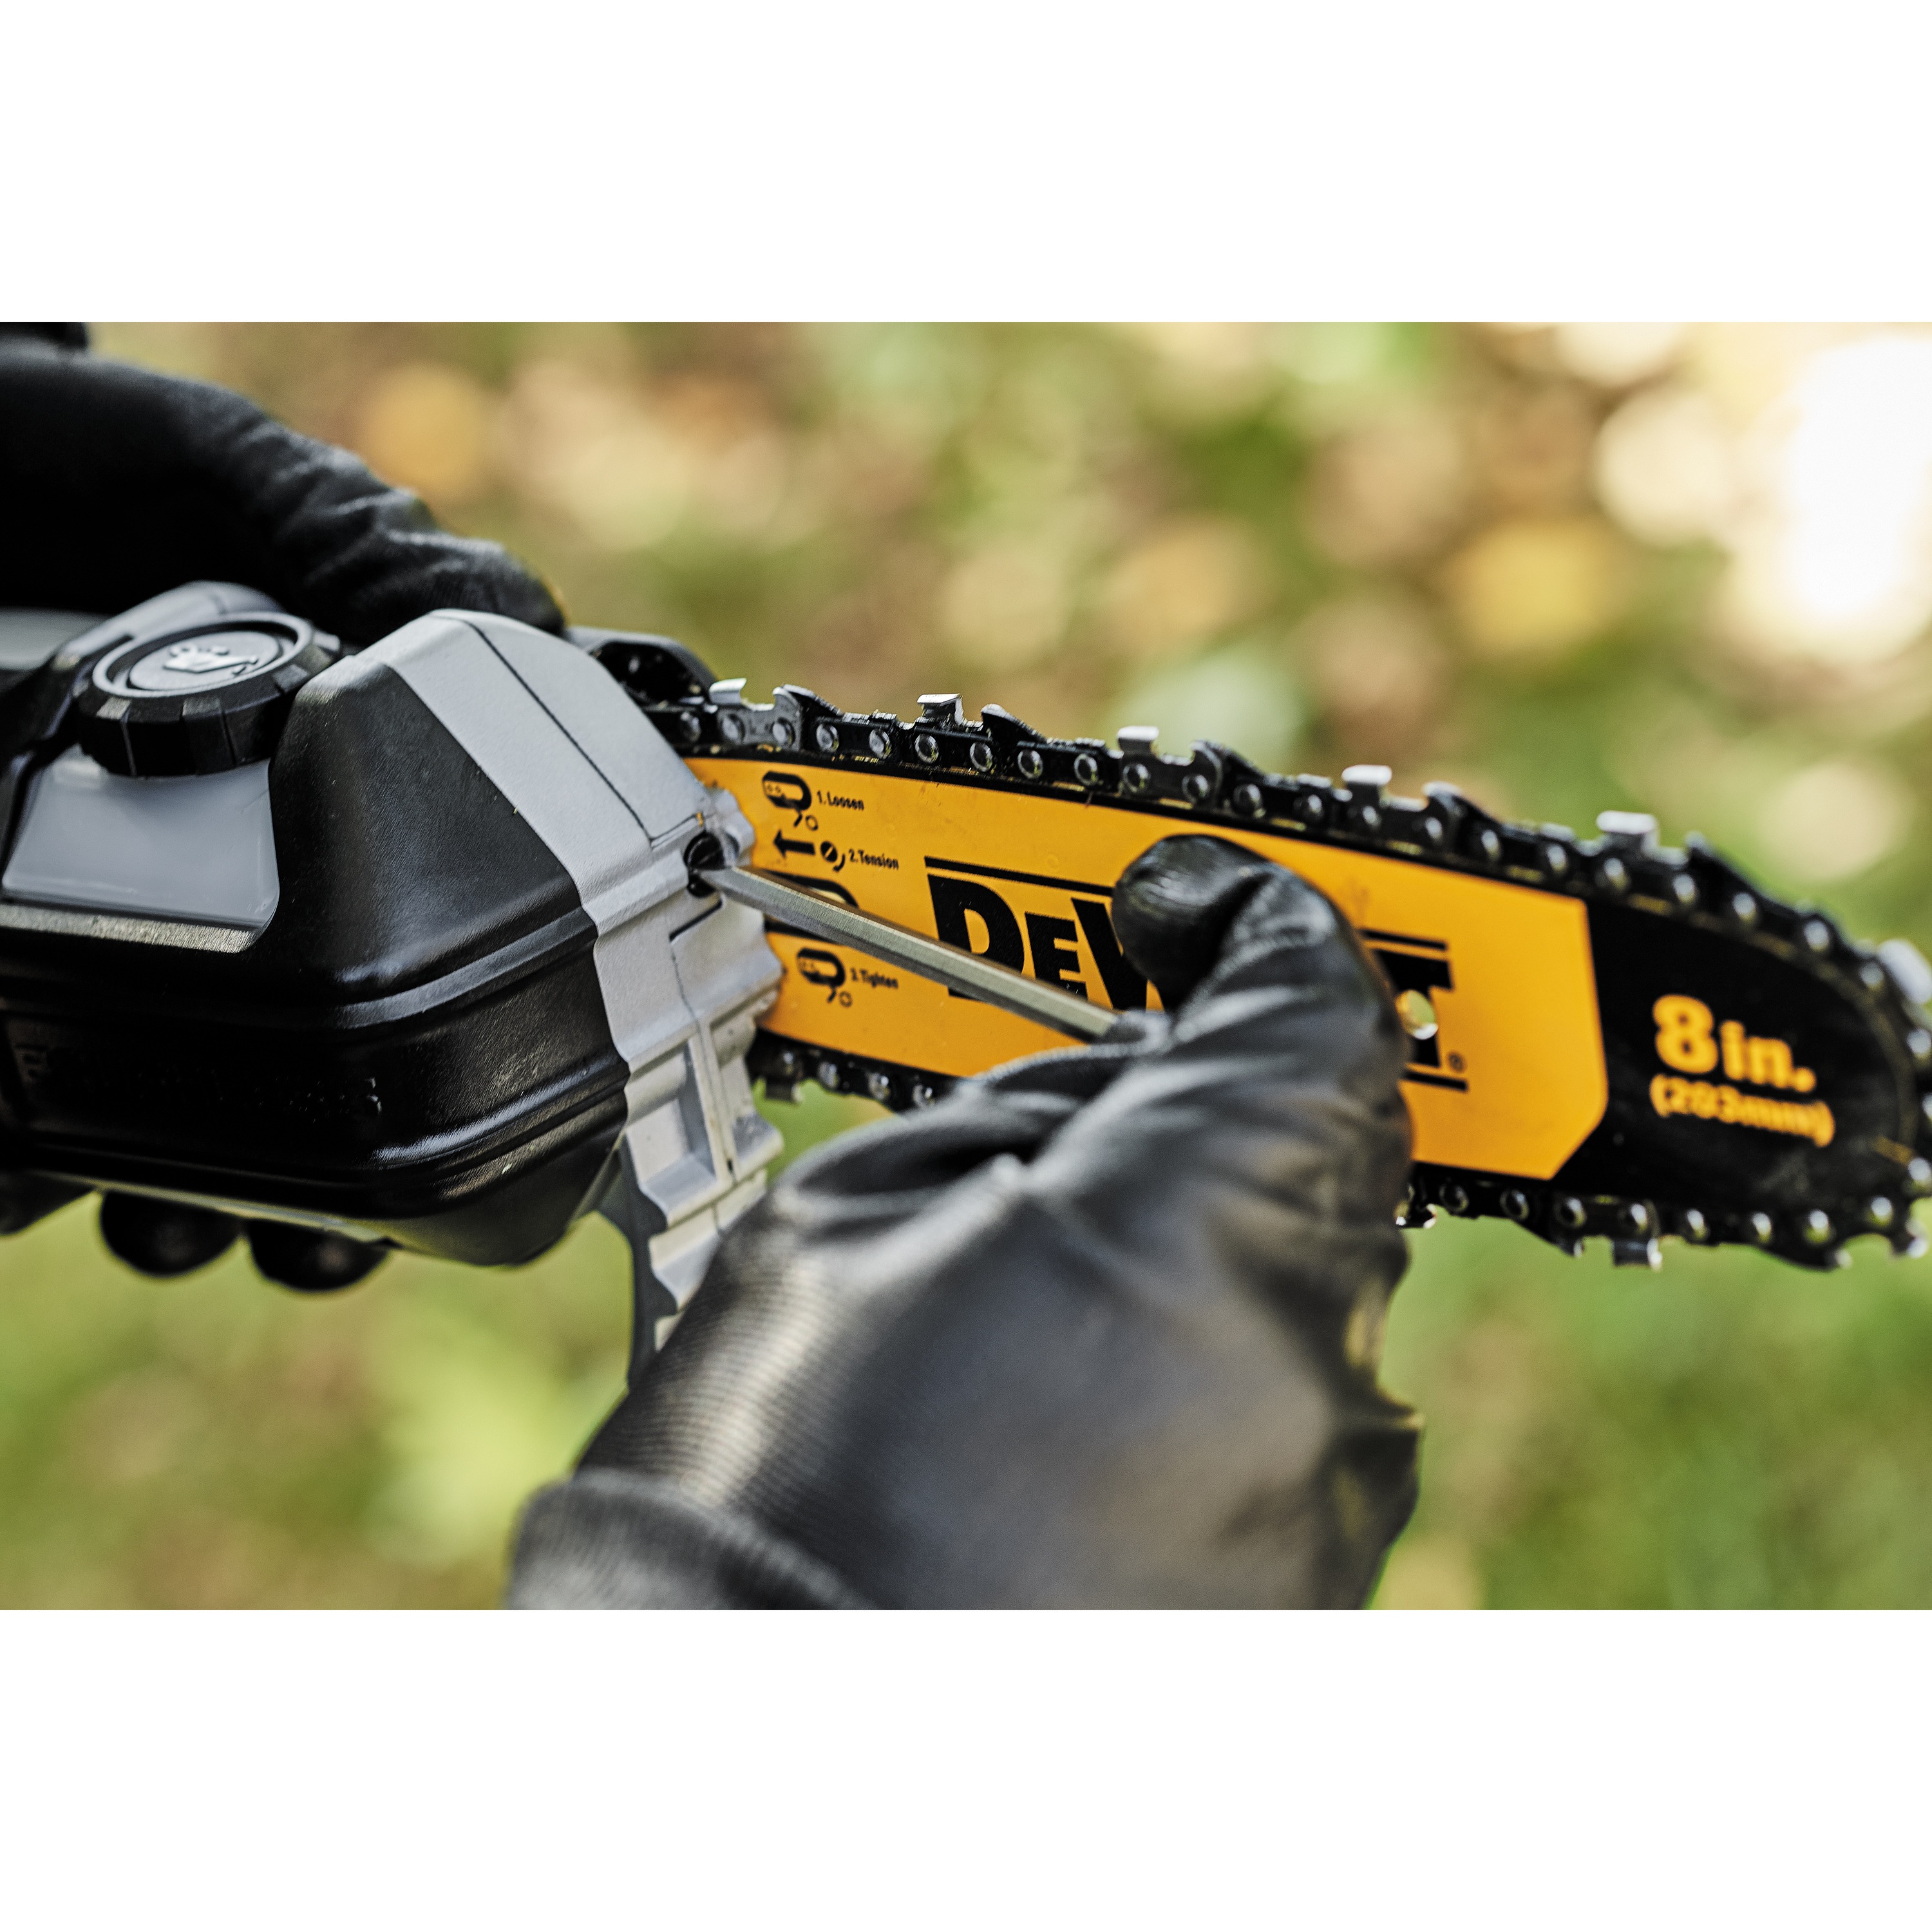 Pivoting Pruner Head Release feature of Brushless Cordless Pole Saw.